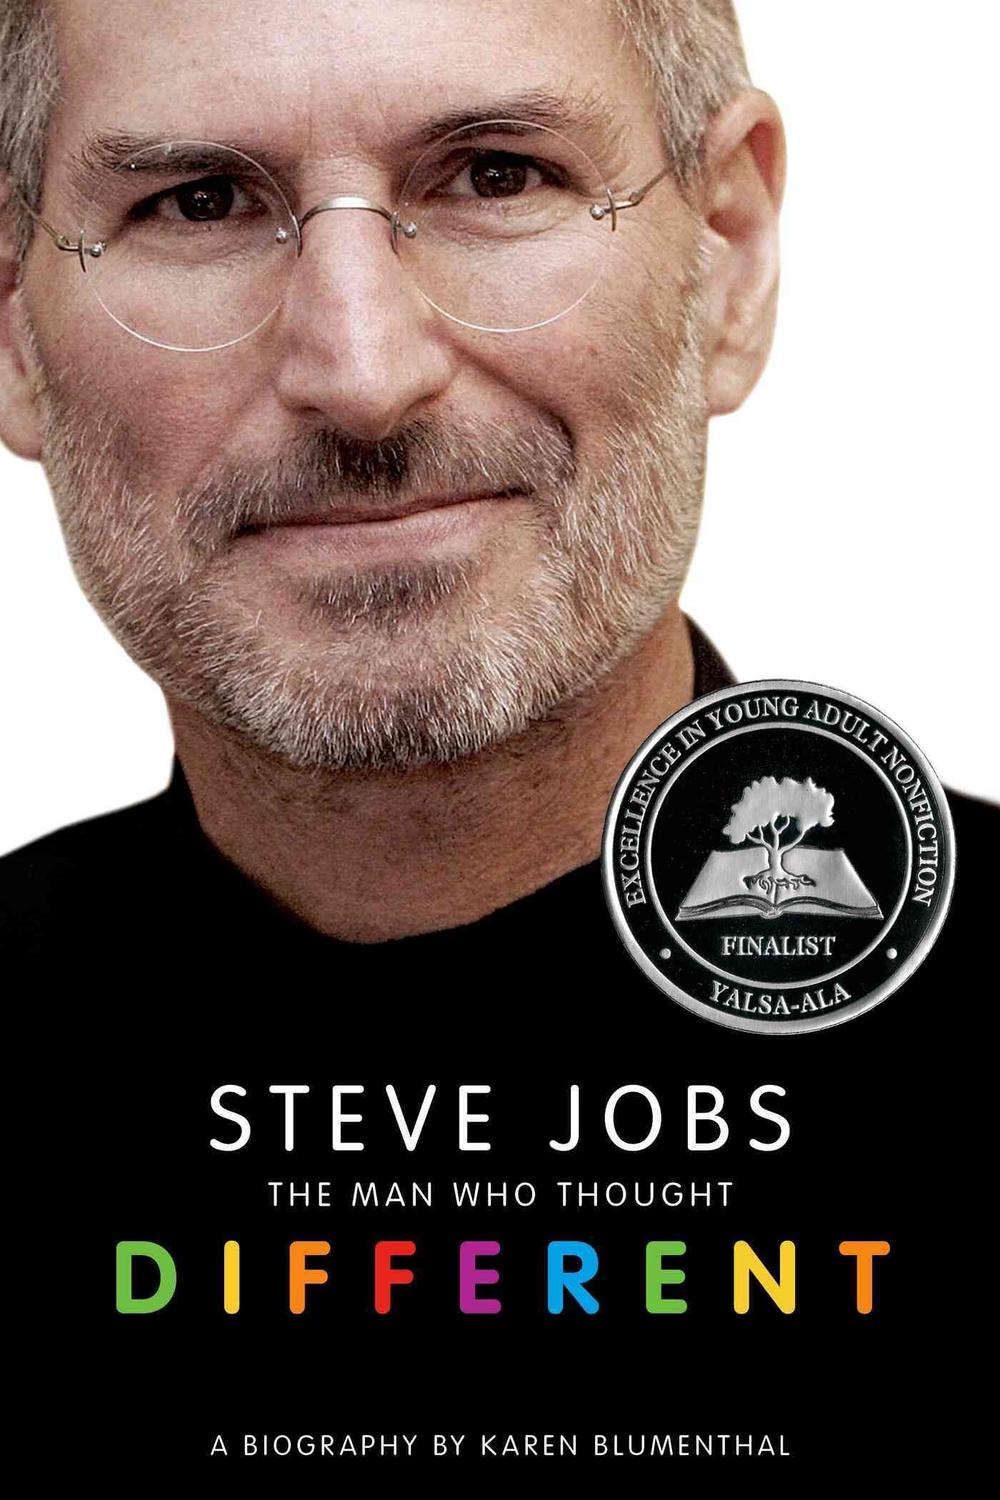 steve jobs the man who thought different by karen blumenthal